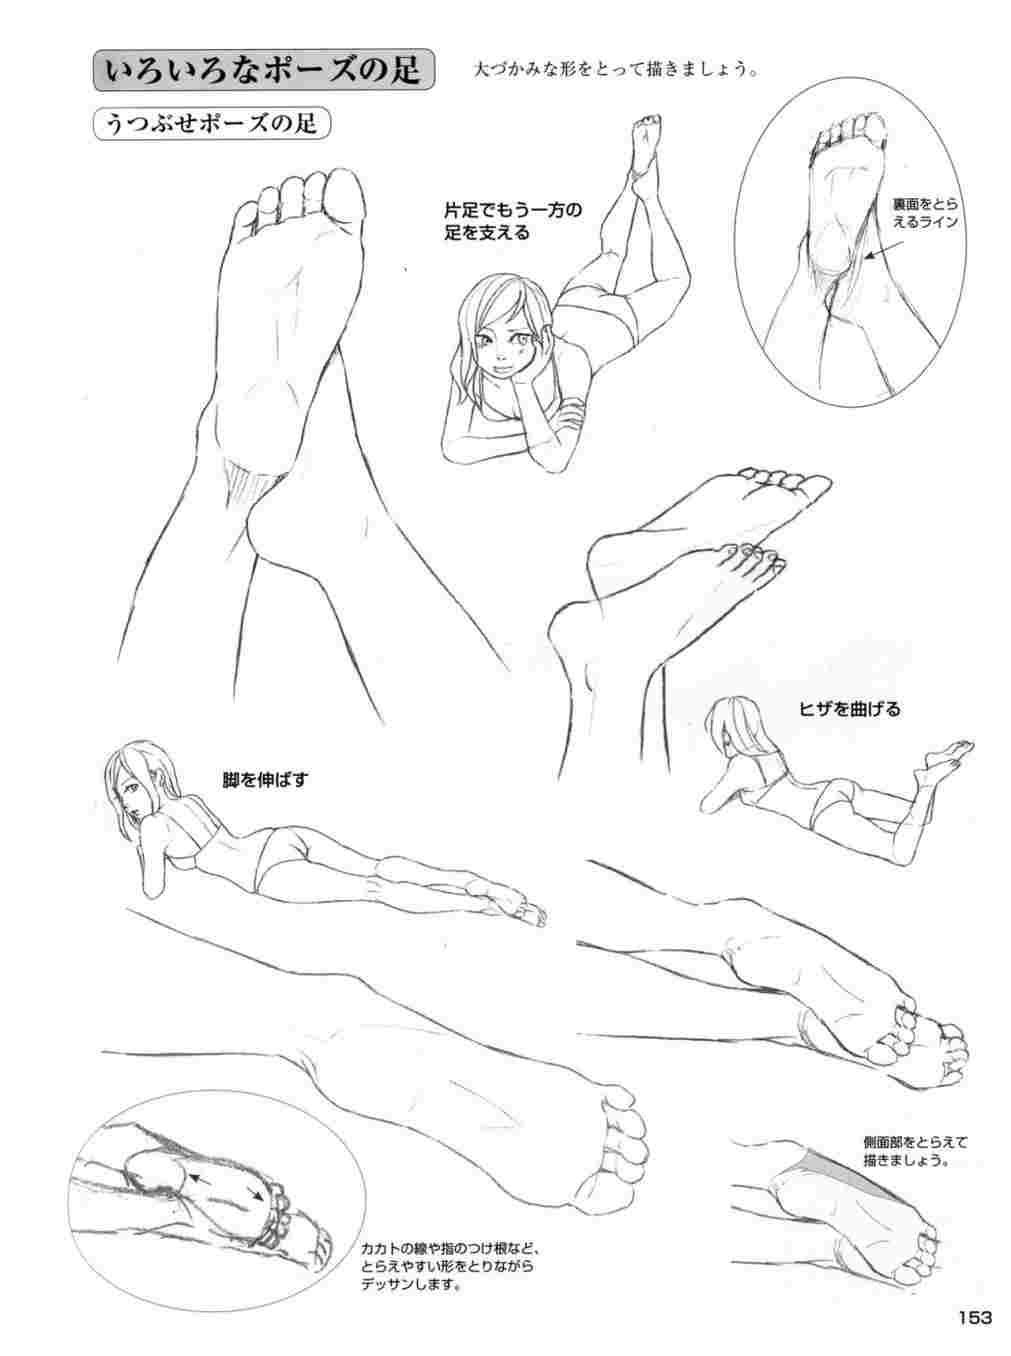 How To Draw Anime Crossed Arms